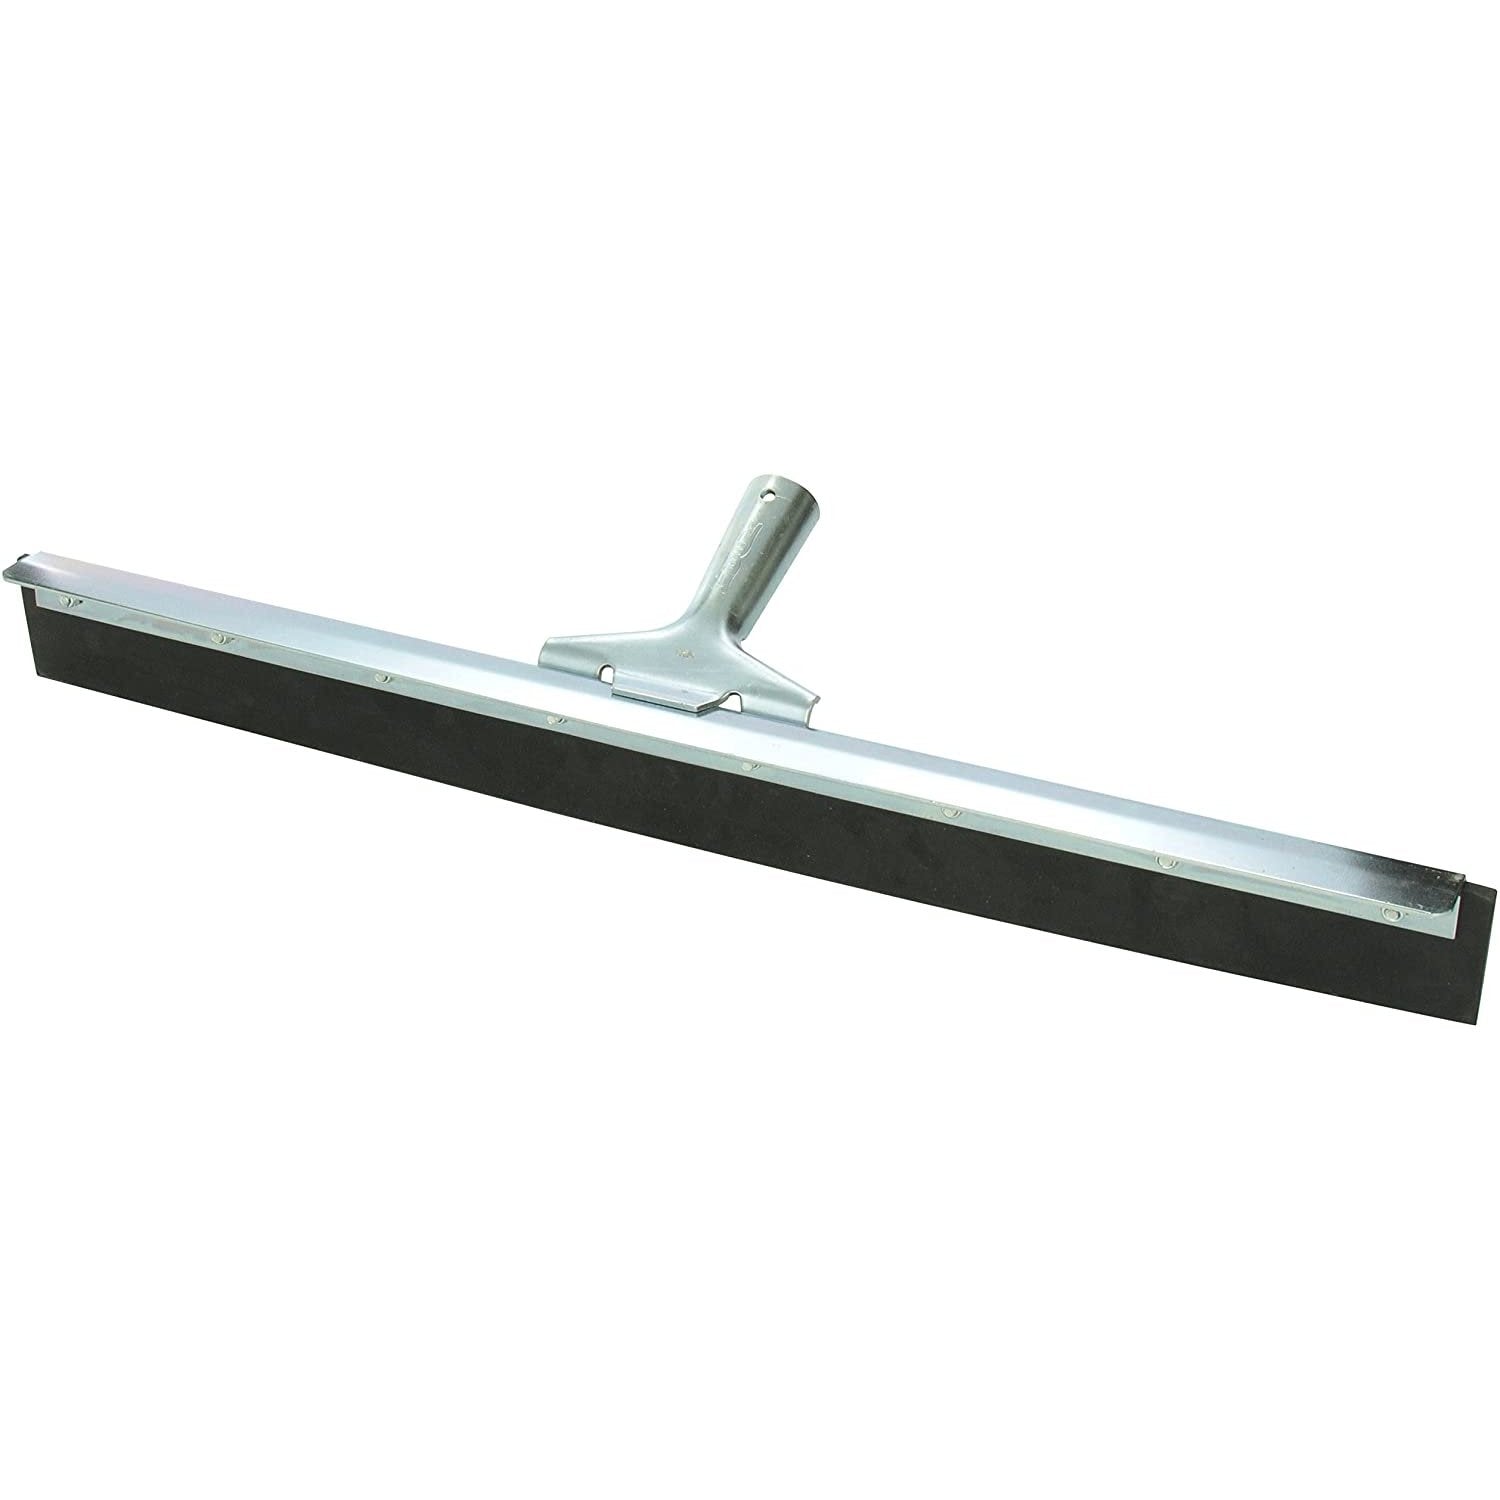 Industrial Floor Cleaning Squeegee | Supply Master | Accra, Ghana Janitorial & Cleaning Buy Tools hardware Building materials